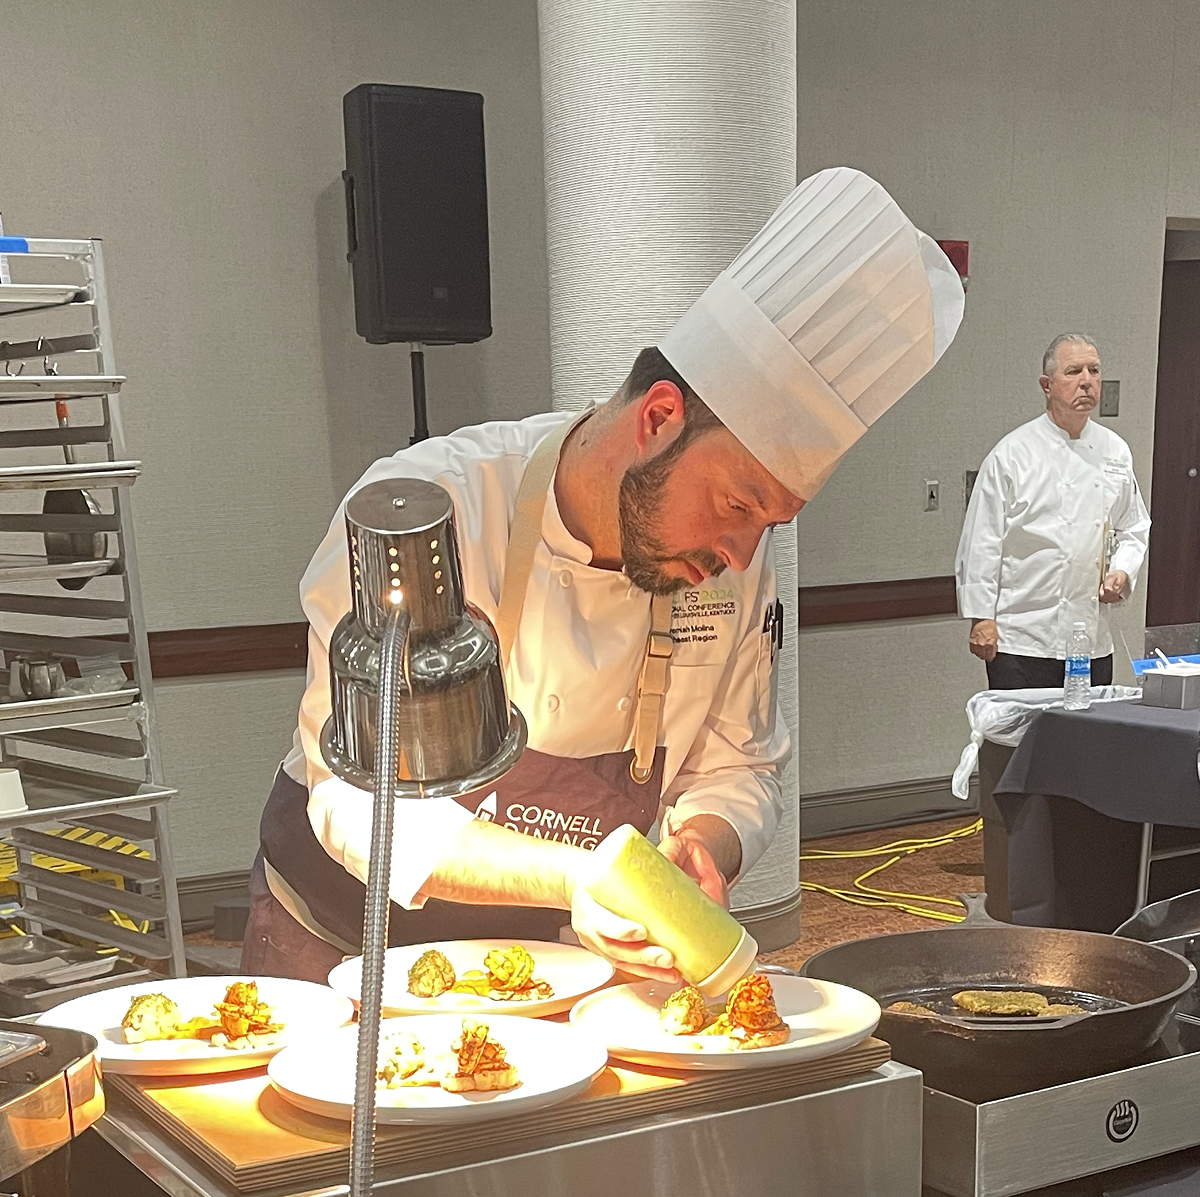 A chef preparing plates of food at a competition workstation